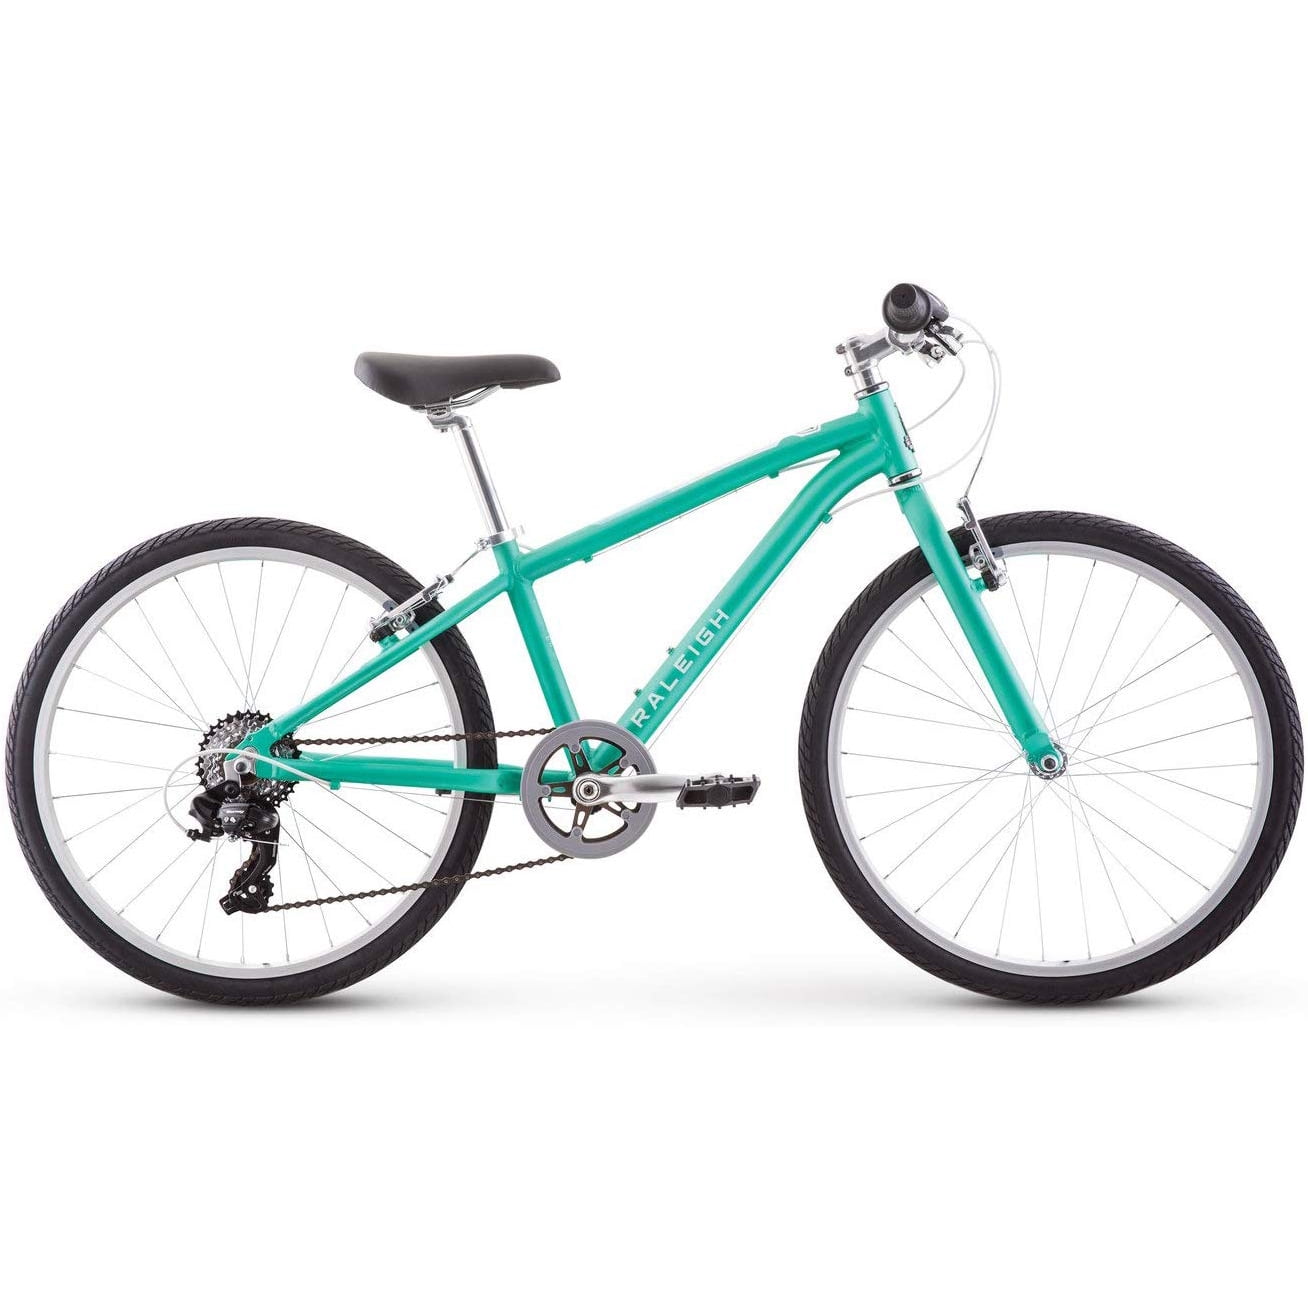 Raleigh Bicycle Alysa 24 In., Kids Flat Bar Road Bicycle for 8-12 Year Olds, Teal